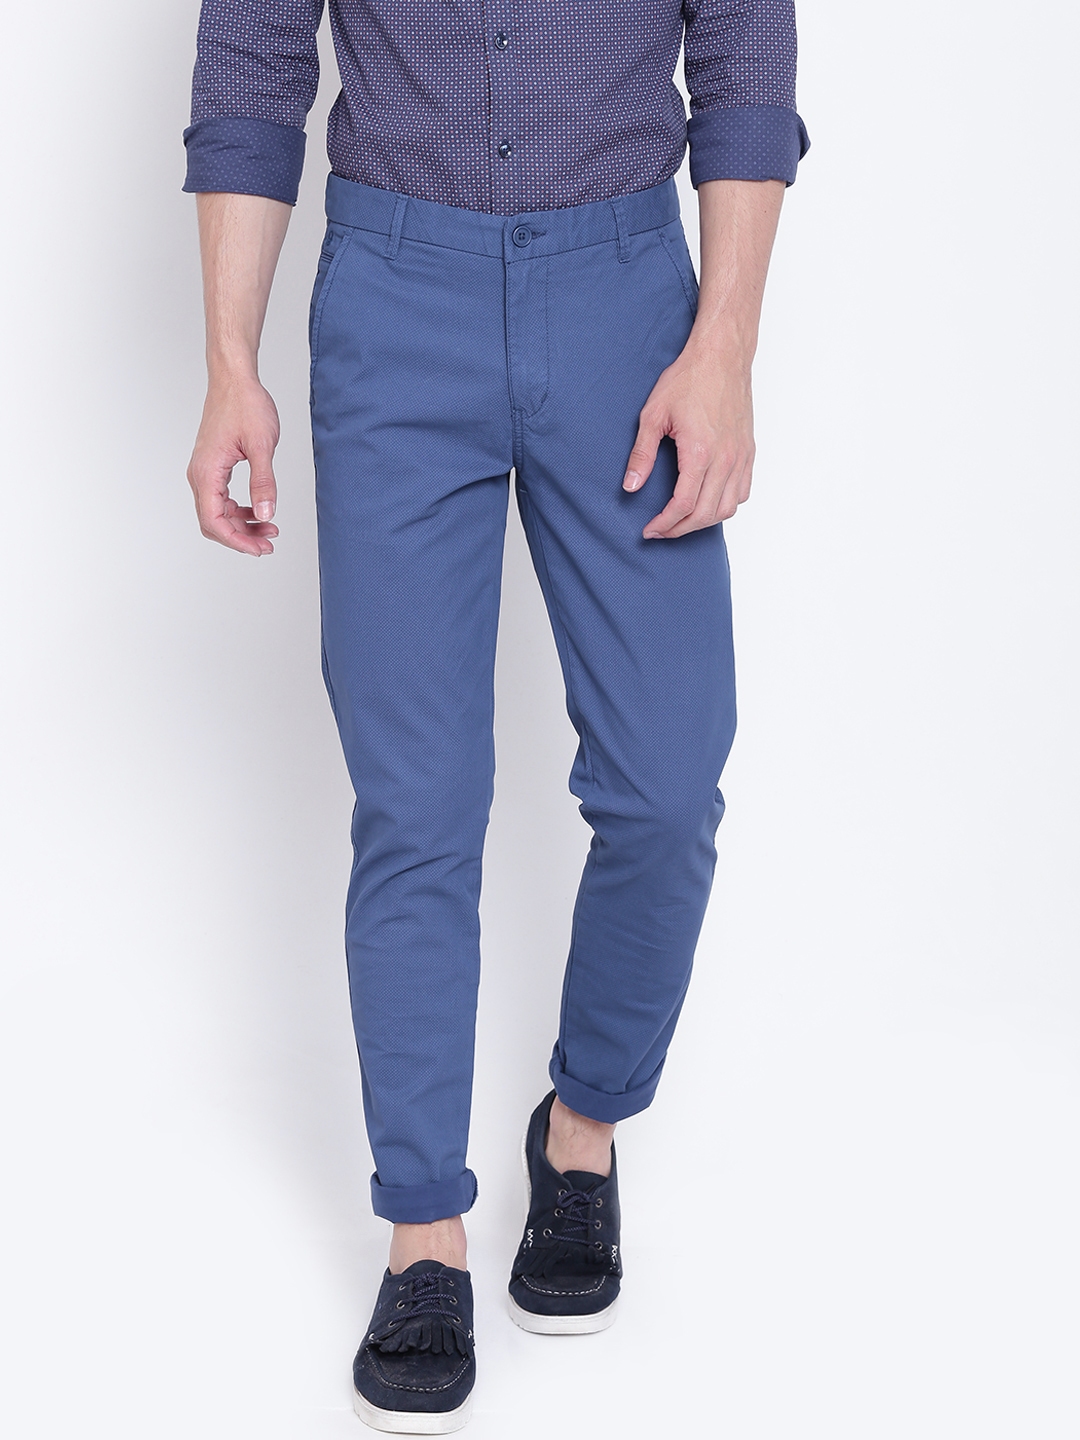 Buy United Colors Of Benetton Men Blue Slim Fit Printed Chinos ...